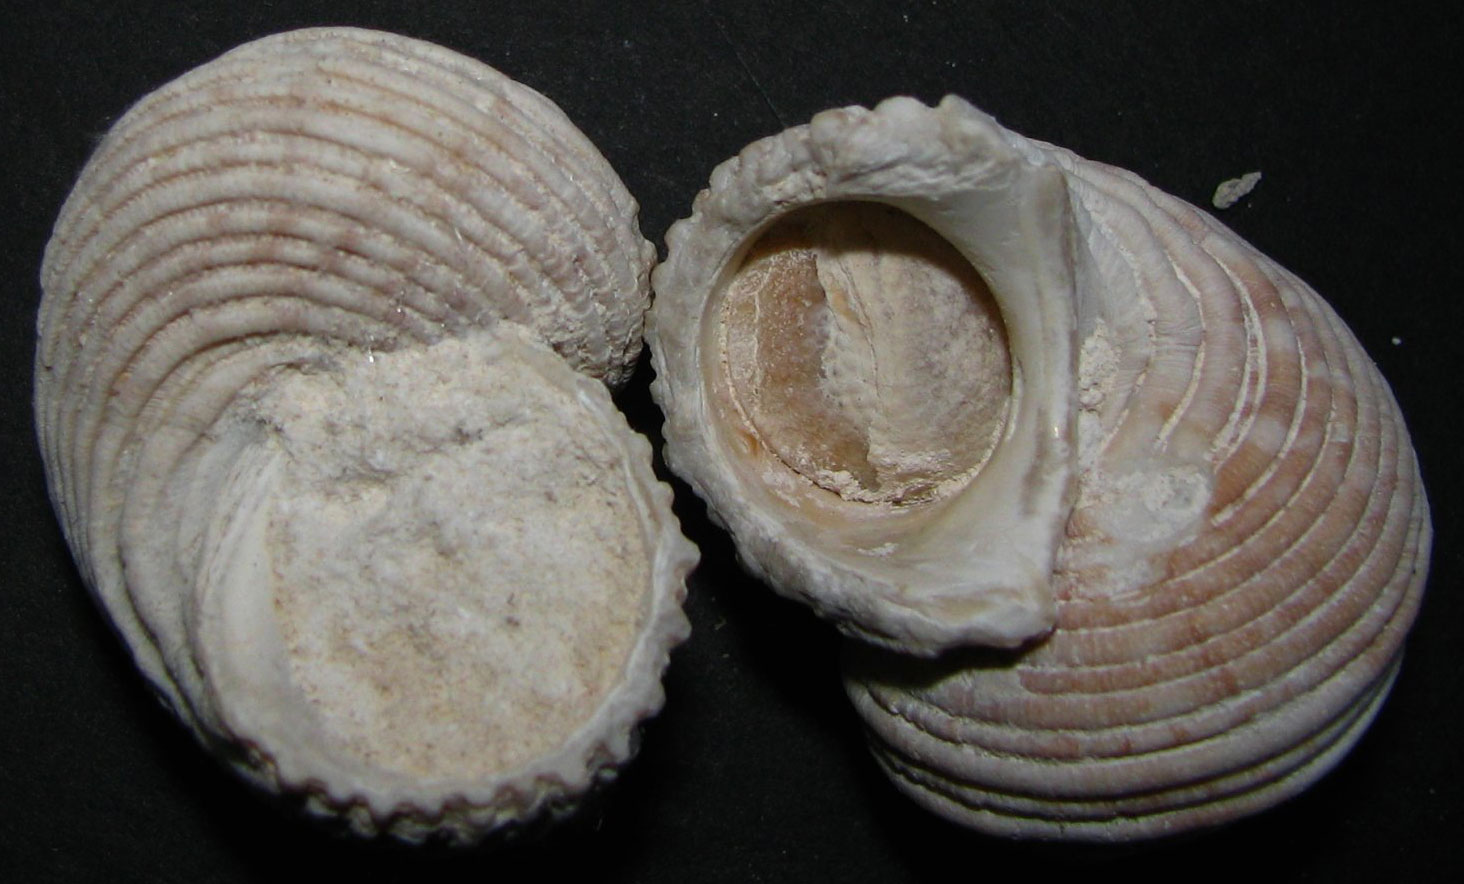 Photograph of two fossil Hawaiian top snail shells from Oahu. The shells are pinkish in color and have horizontal grooves. The apertures (openings) can be seen, although in one shell the aperture appears to be filled with sediment.